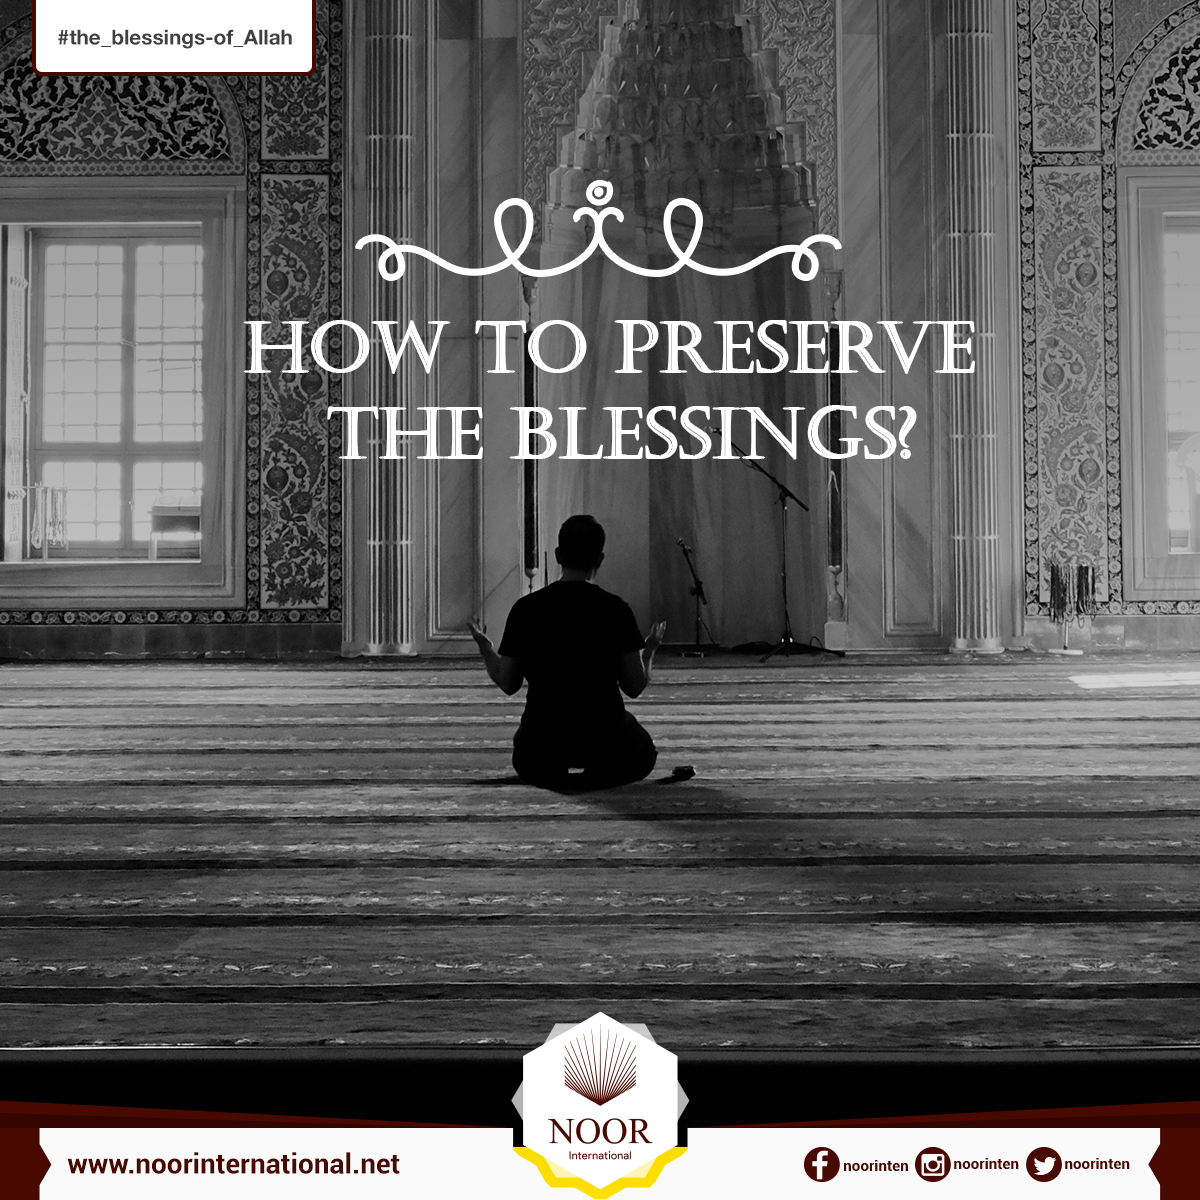 How to preserve the blessings?